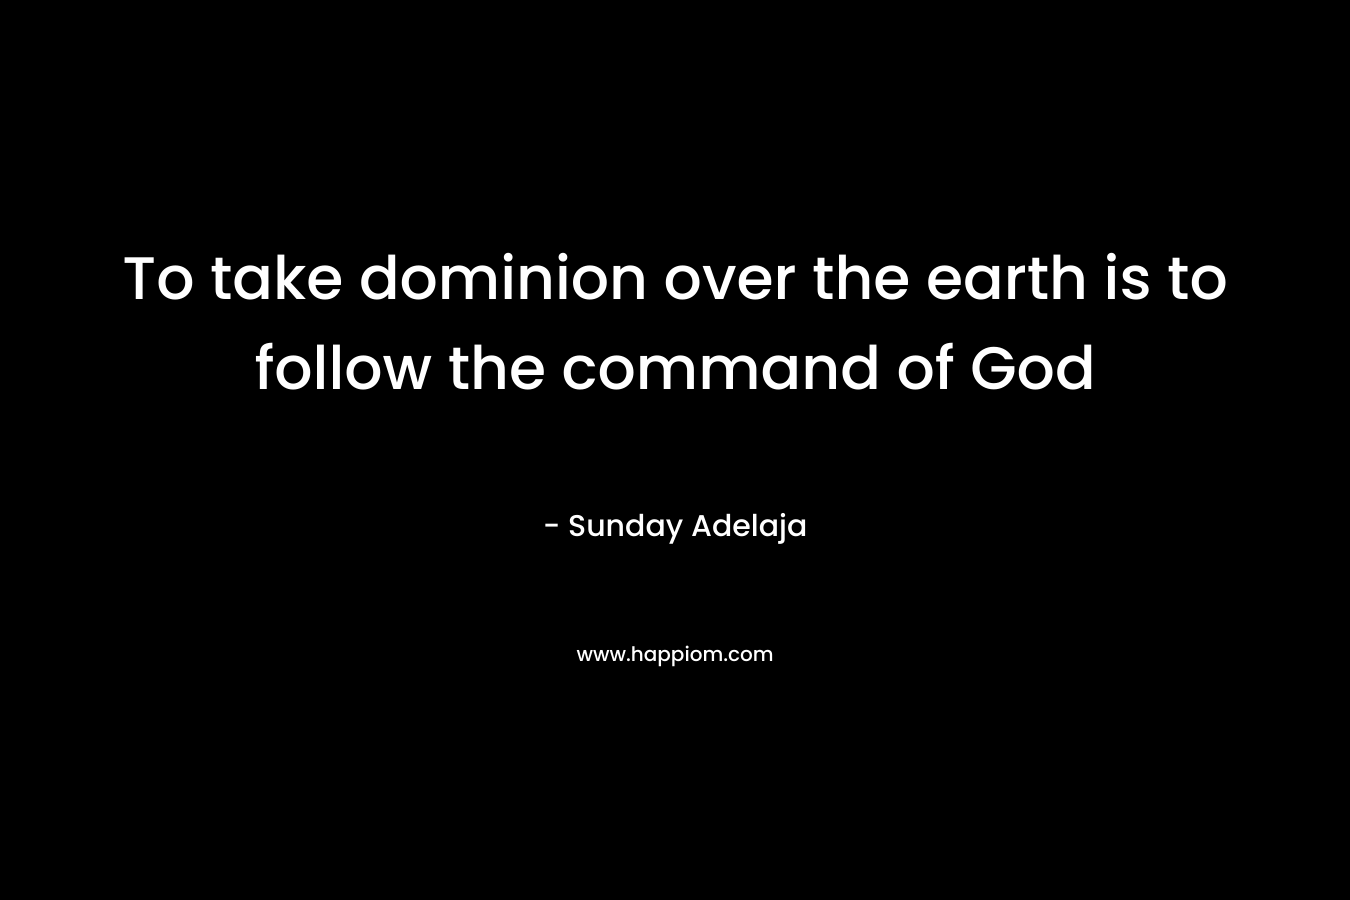 To take dominion over the earth is to follow the command of God